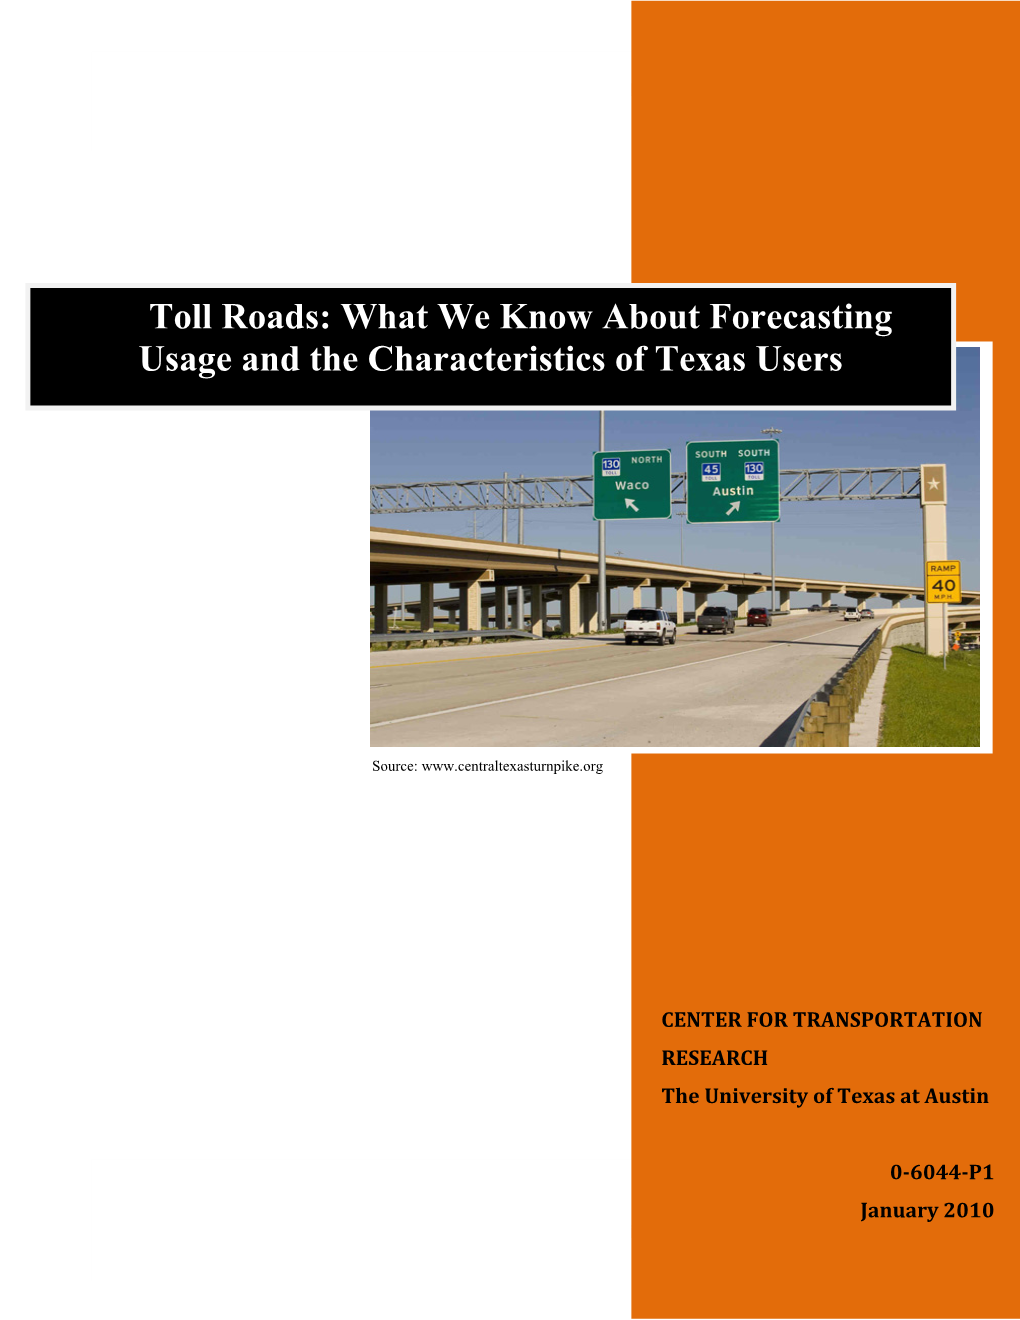 Toll Roads: What We Know About Forecasting Usage and the Characteristics of Texas Users